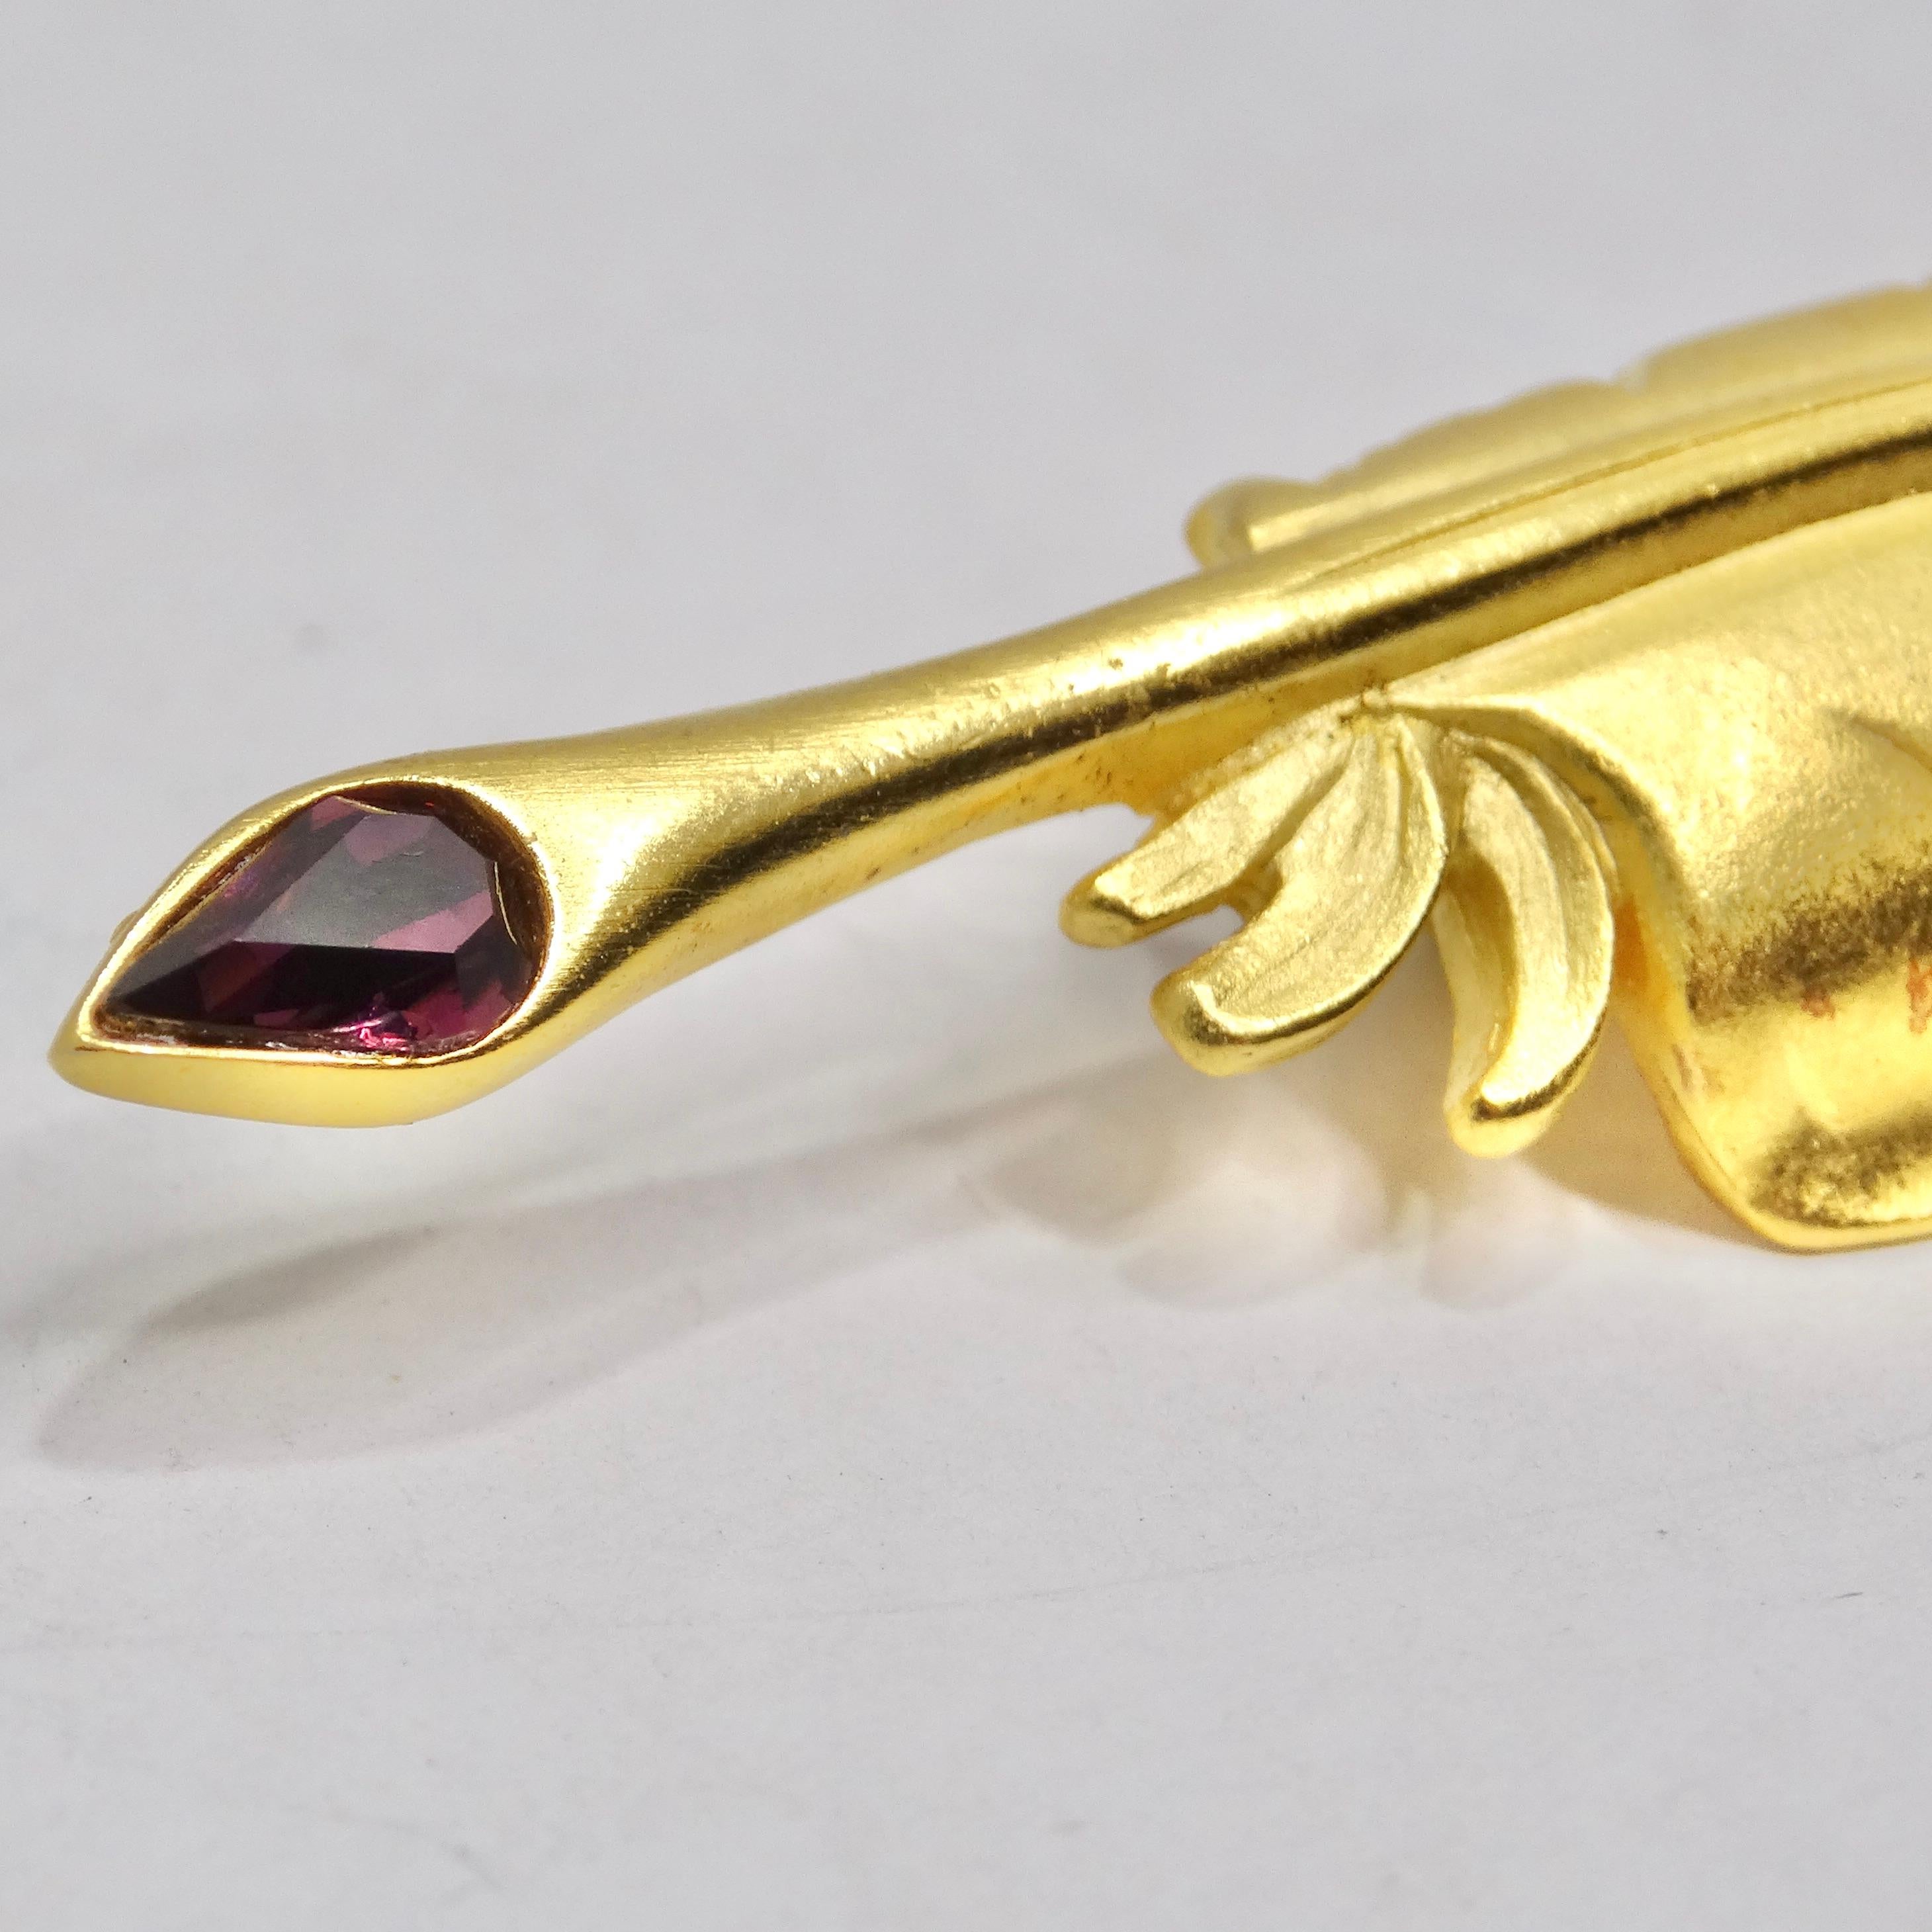 Karl Lagerfeld 1980s Gold Plated Purple Gem Feather Brooch In Excellent Condition For Sale In Scottsdale, AZ